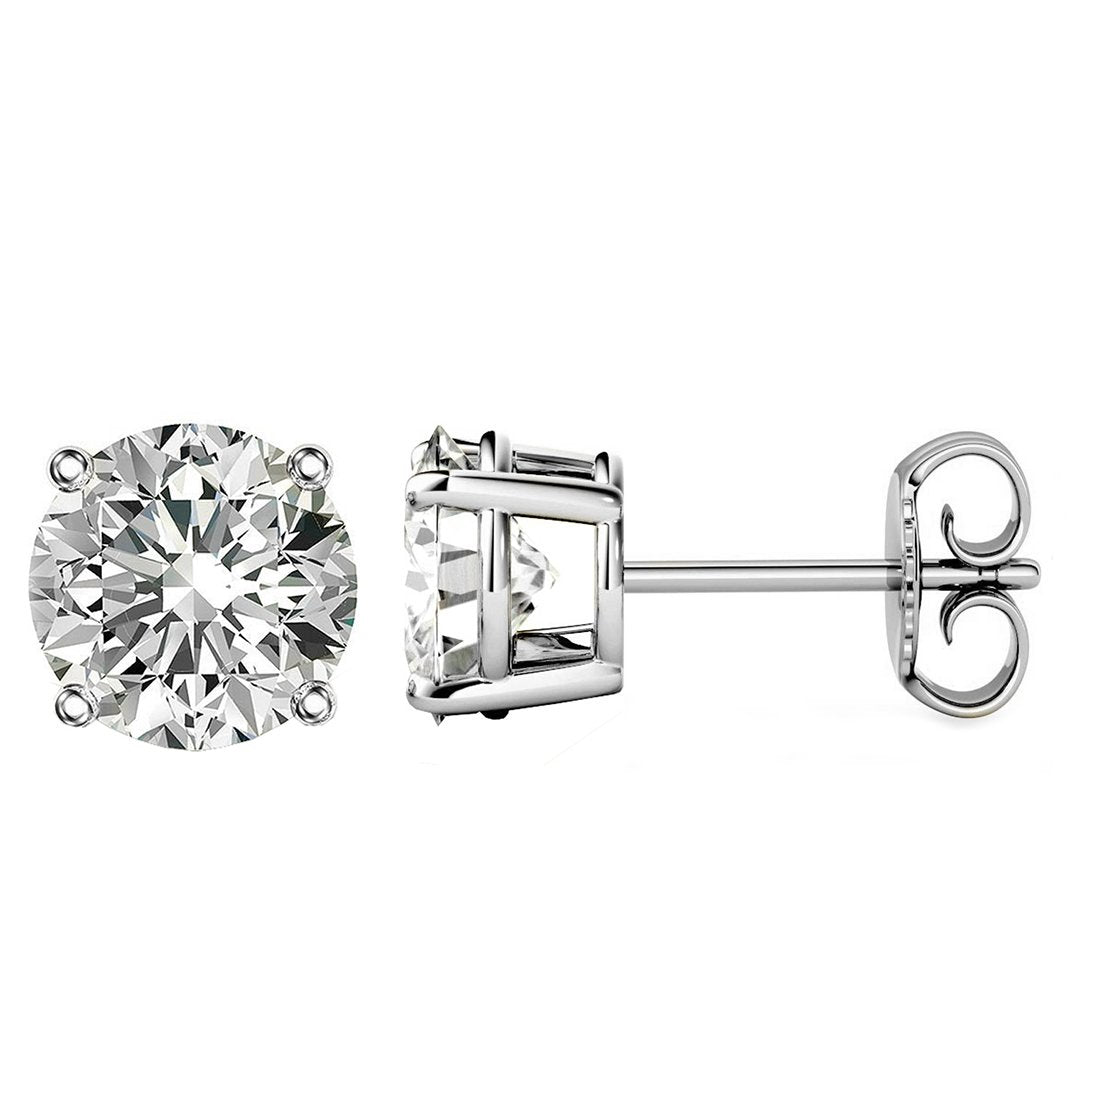 PLATINUM 950 4-PRONG ROUND. Choose From 0.25 CTW To 10.00 CTW